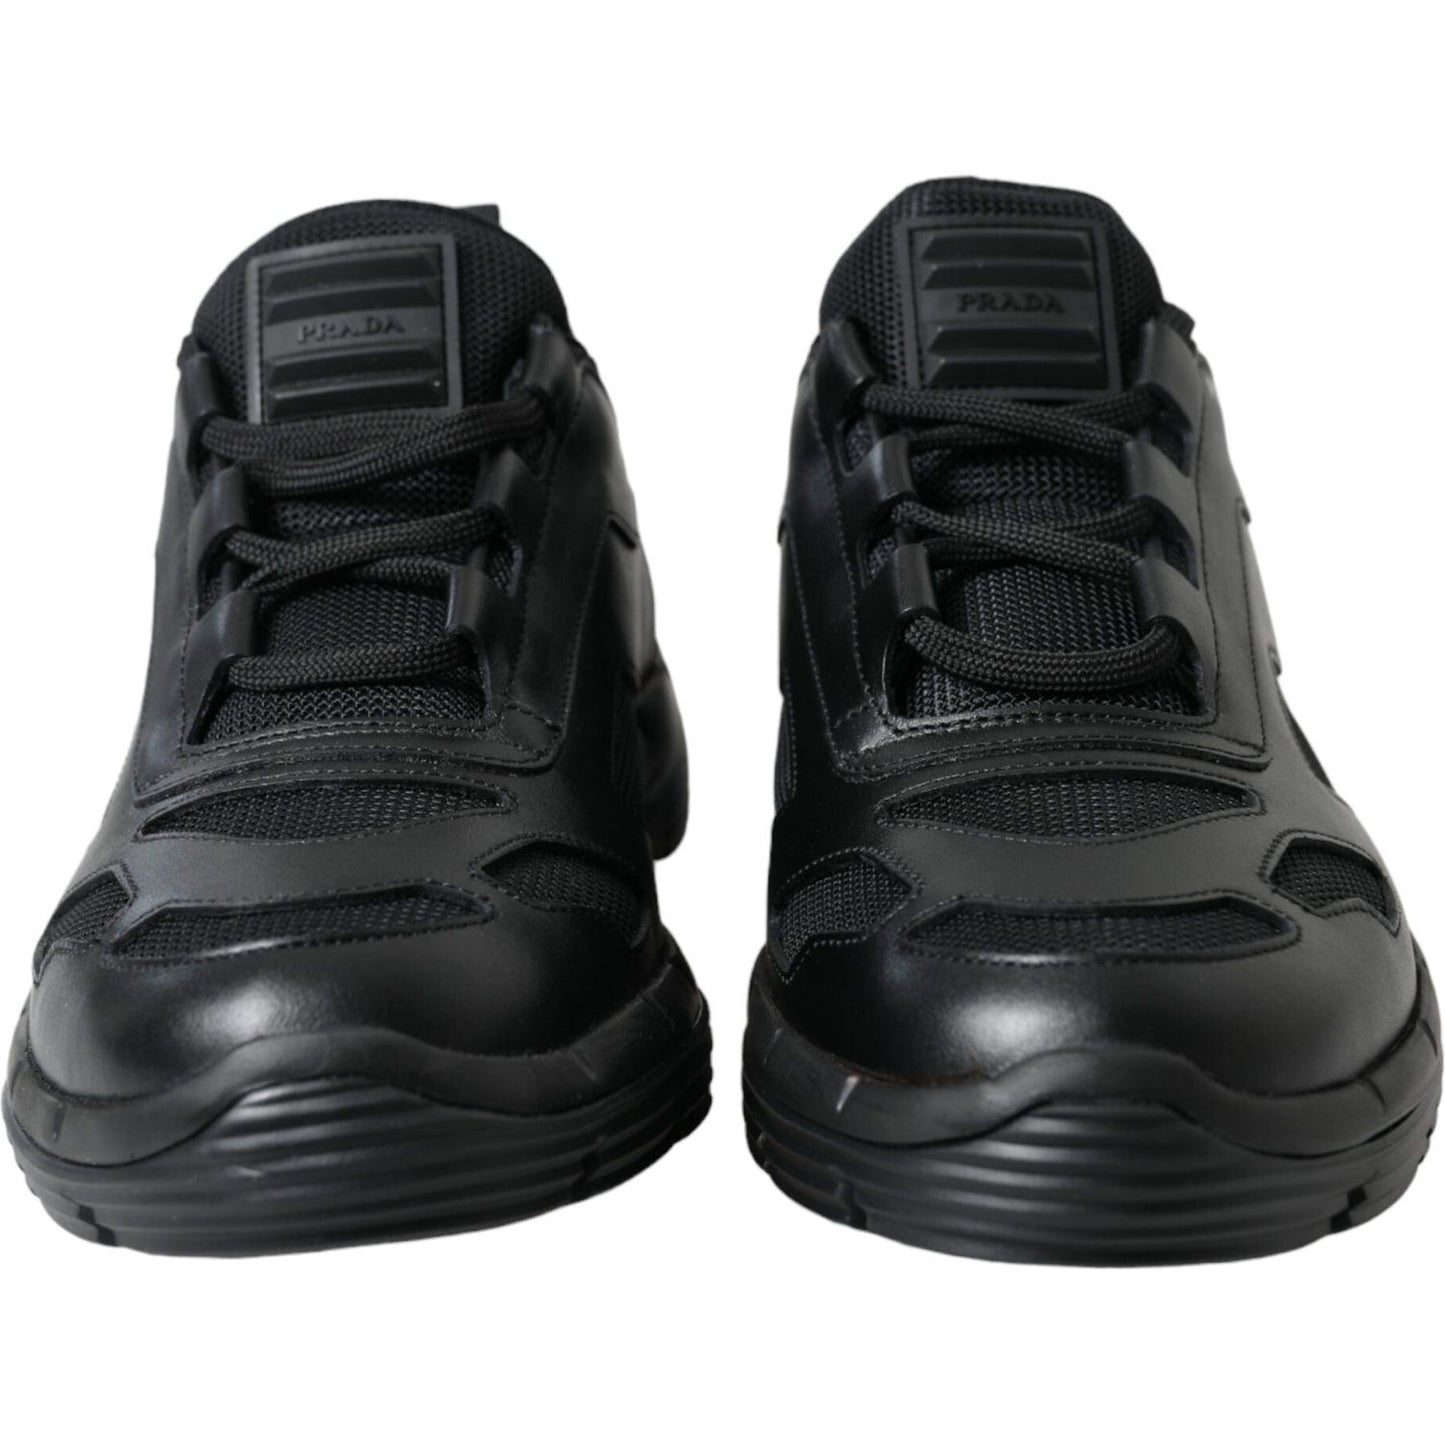 Prada Sleek Low Top Leather Sneakers in Timeless Black black-mesh-panel-low-top-twist-trainers-sneakers-shoes 465A4088-BG-scaled-51f5f9ad-e39.jpg